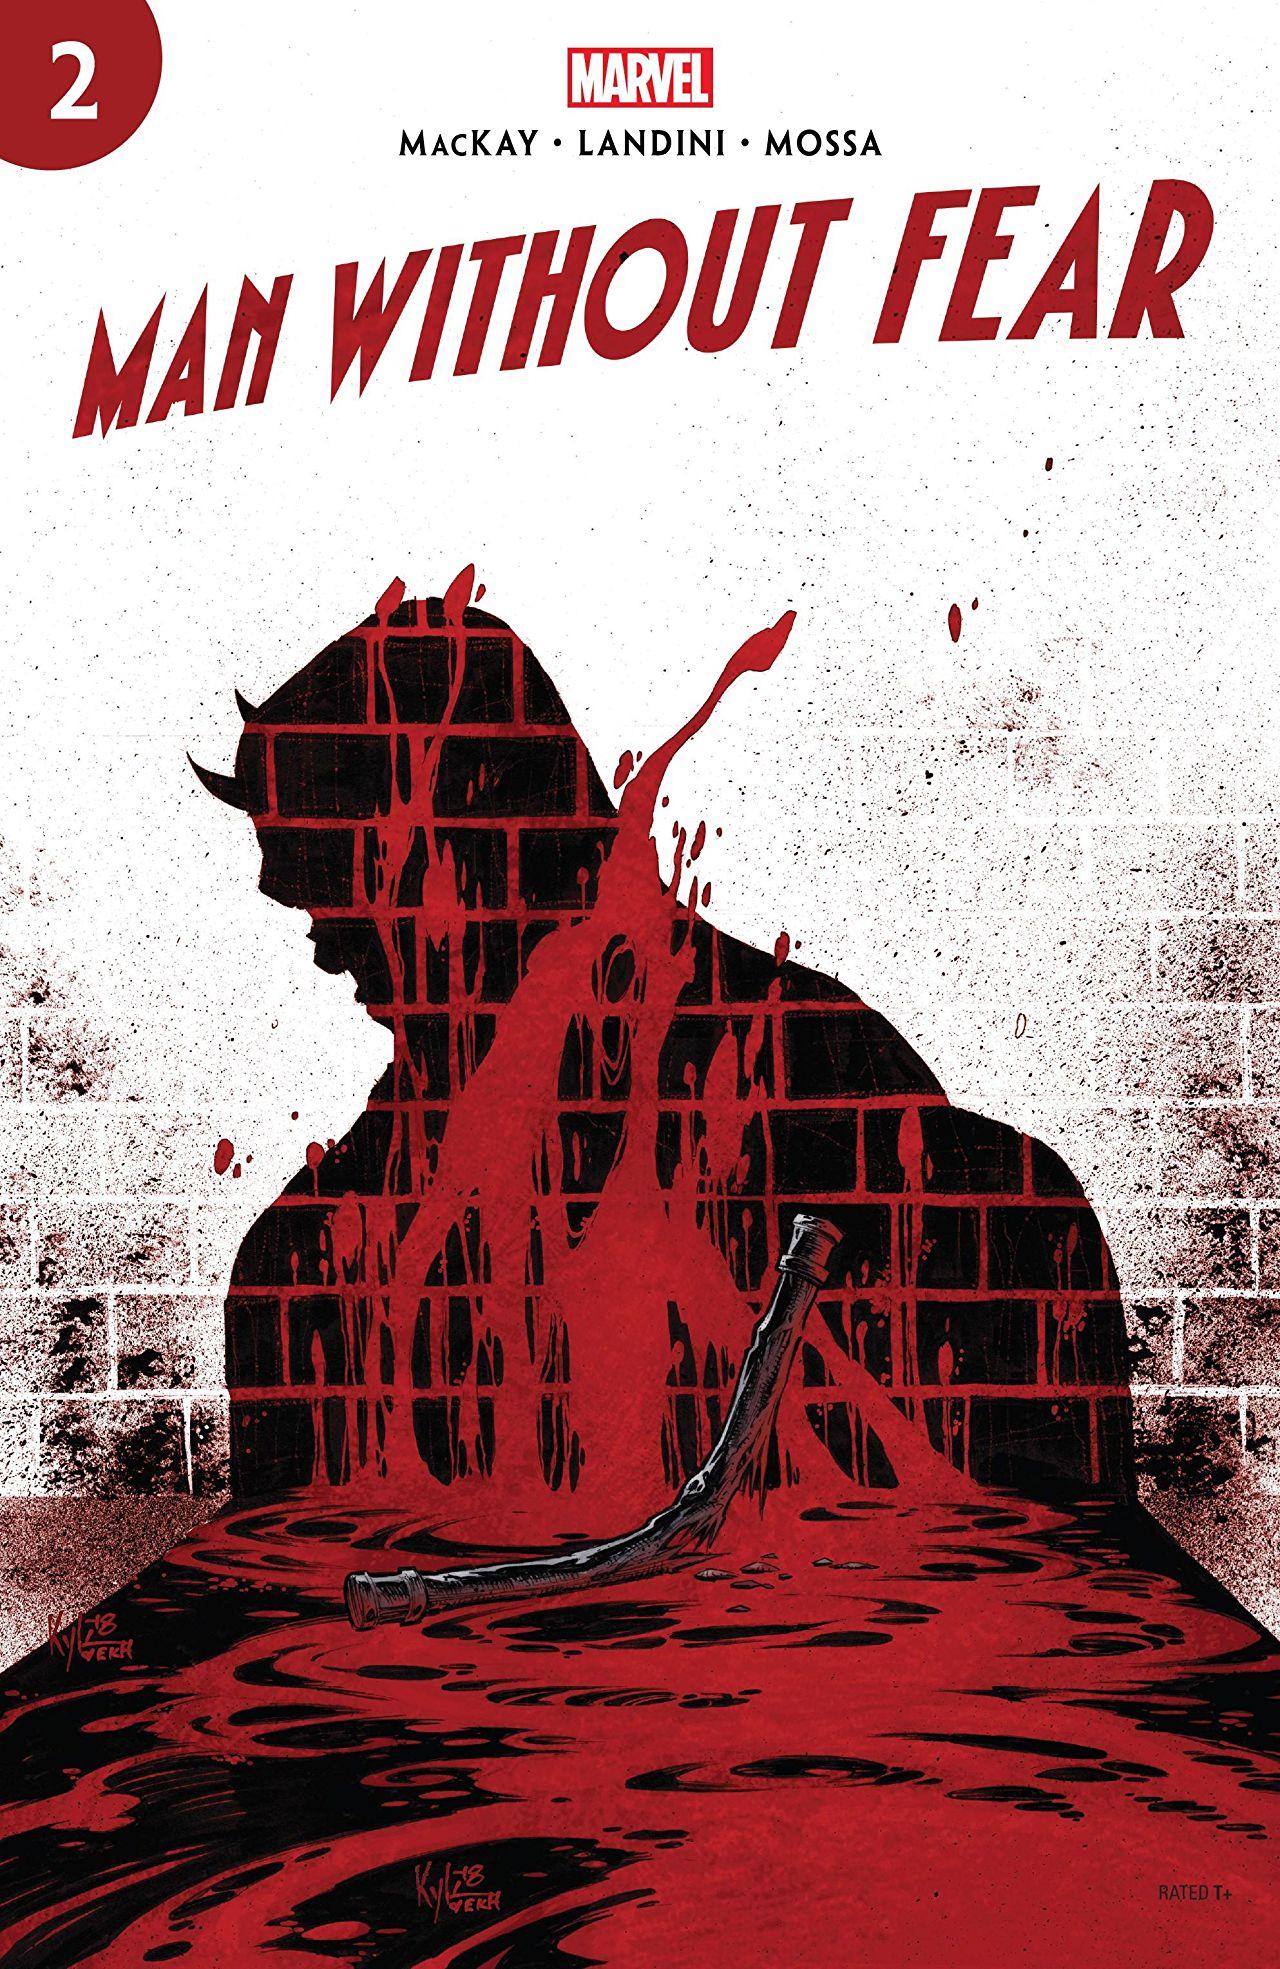 Man Without Fear Vol. 1 #2